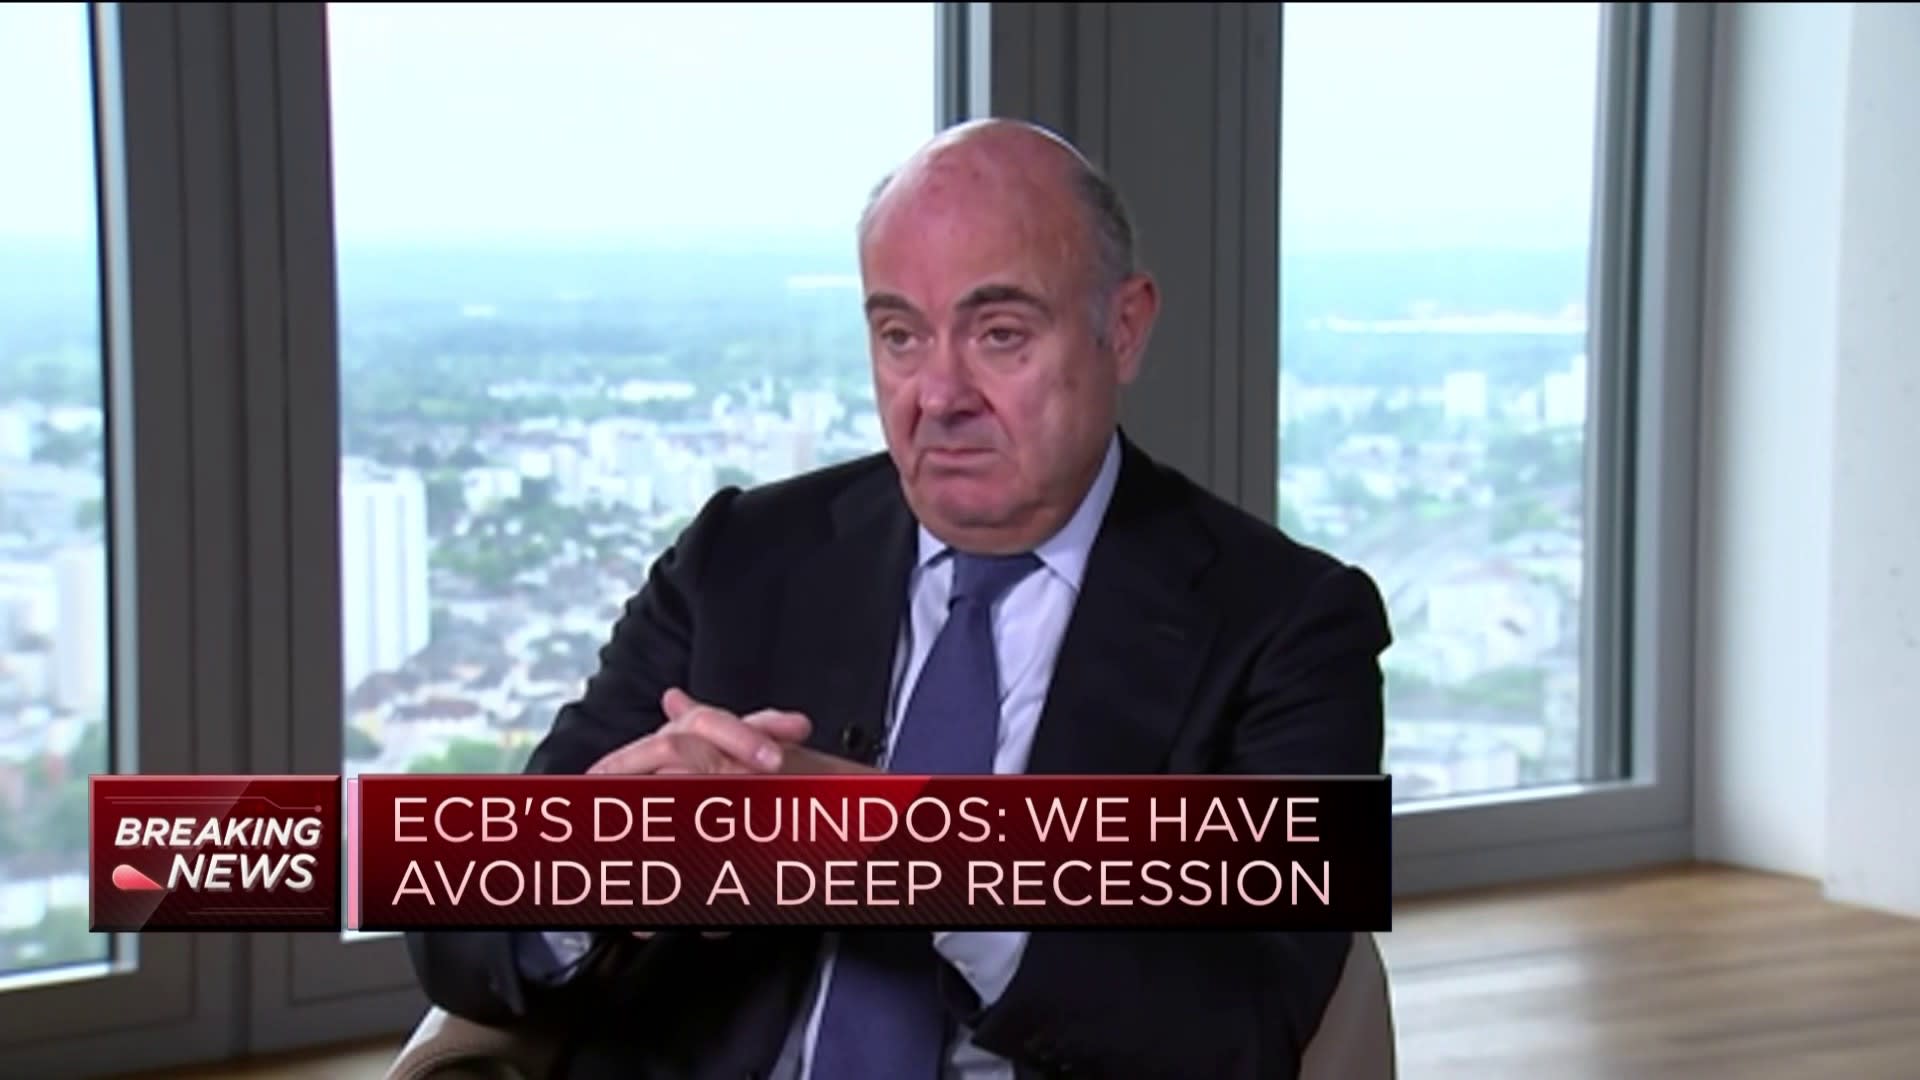 Markets underestimate geopolitical risk as raft of elections looms, ECB’s De Guindos says